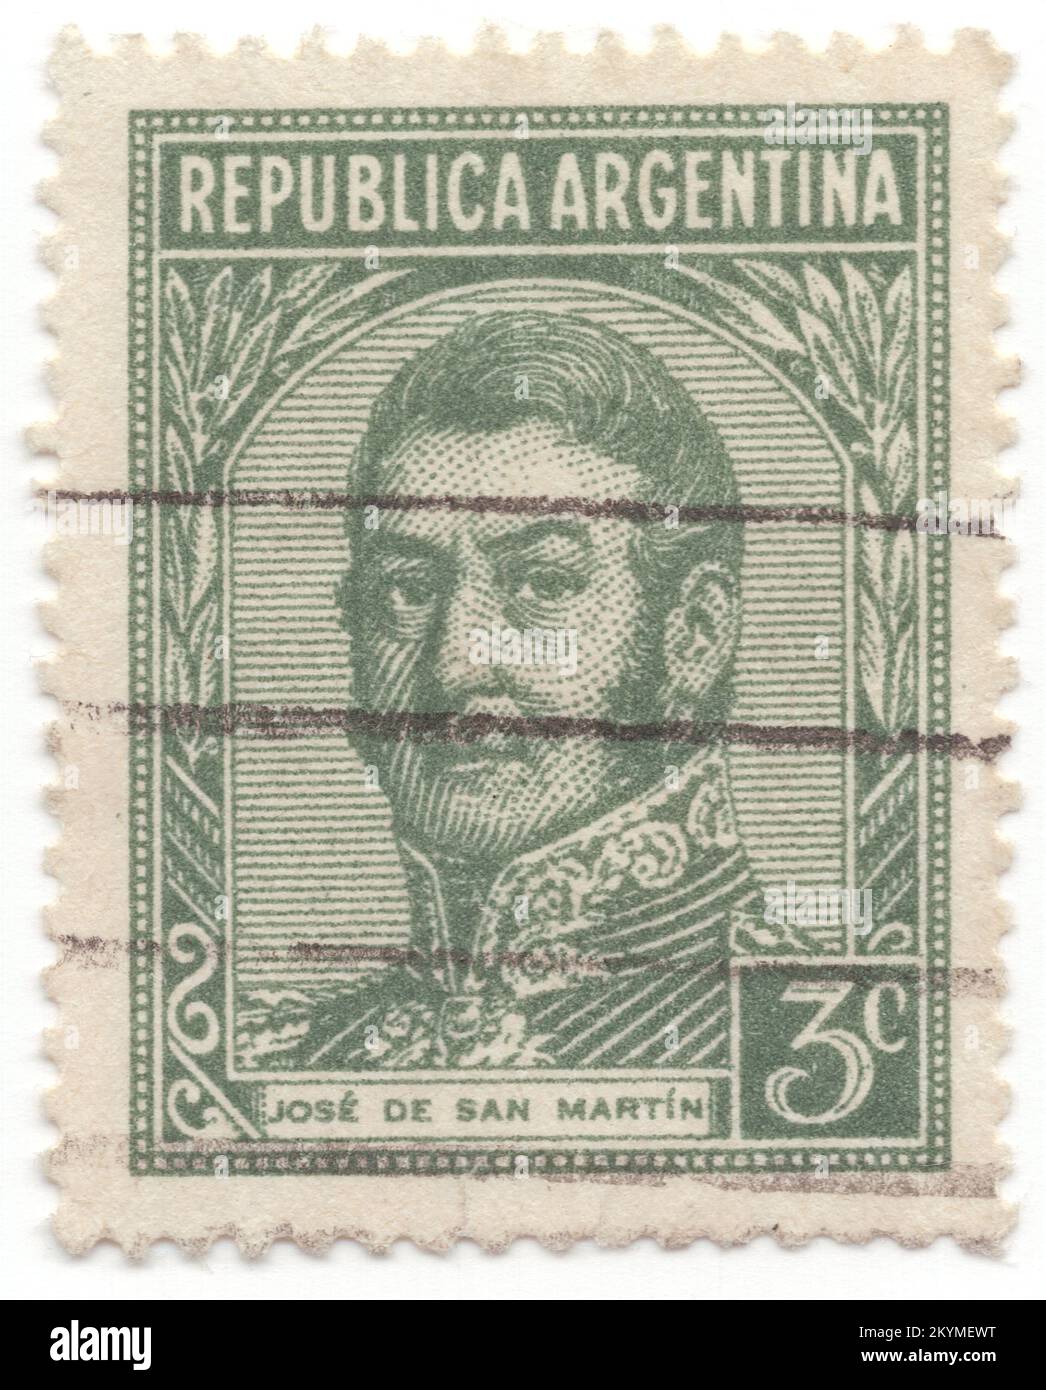 ARGENTINA - 1935: 3 centavos green postage stamp depicting portrait of José de San Martín (Jose Francisco de San Martín y Matorras), known as the Liberator of Argentina, Chile and Peru. Argentine general and the primary leader of the southern and central parts of South America's successful struggle for independence from the Spanish Empire who served as the Protector of Peru. Born in Yapeyú, Corrientes, in modern-day Argentina, he left the Viceroyalty of the Río de la Plata at the early age of seven to study in Málaga, Spain Stock Photo